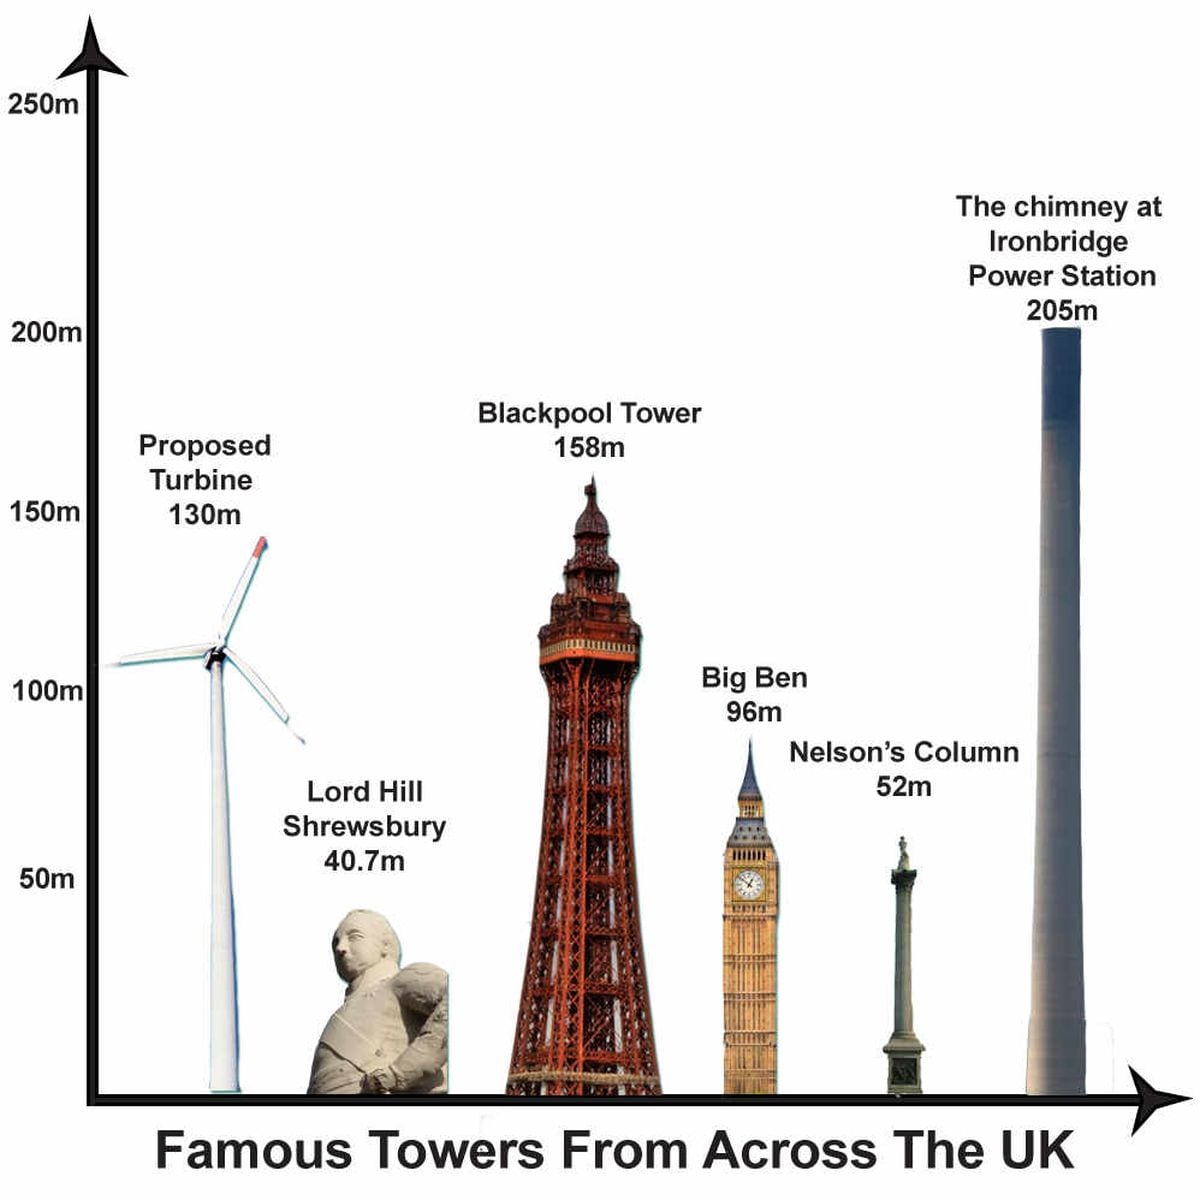 How the proposed turbines would measure up against some of the tallest landmarks on the UK?skyline